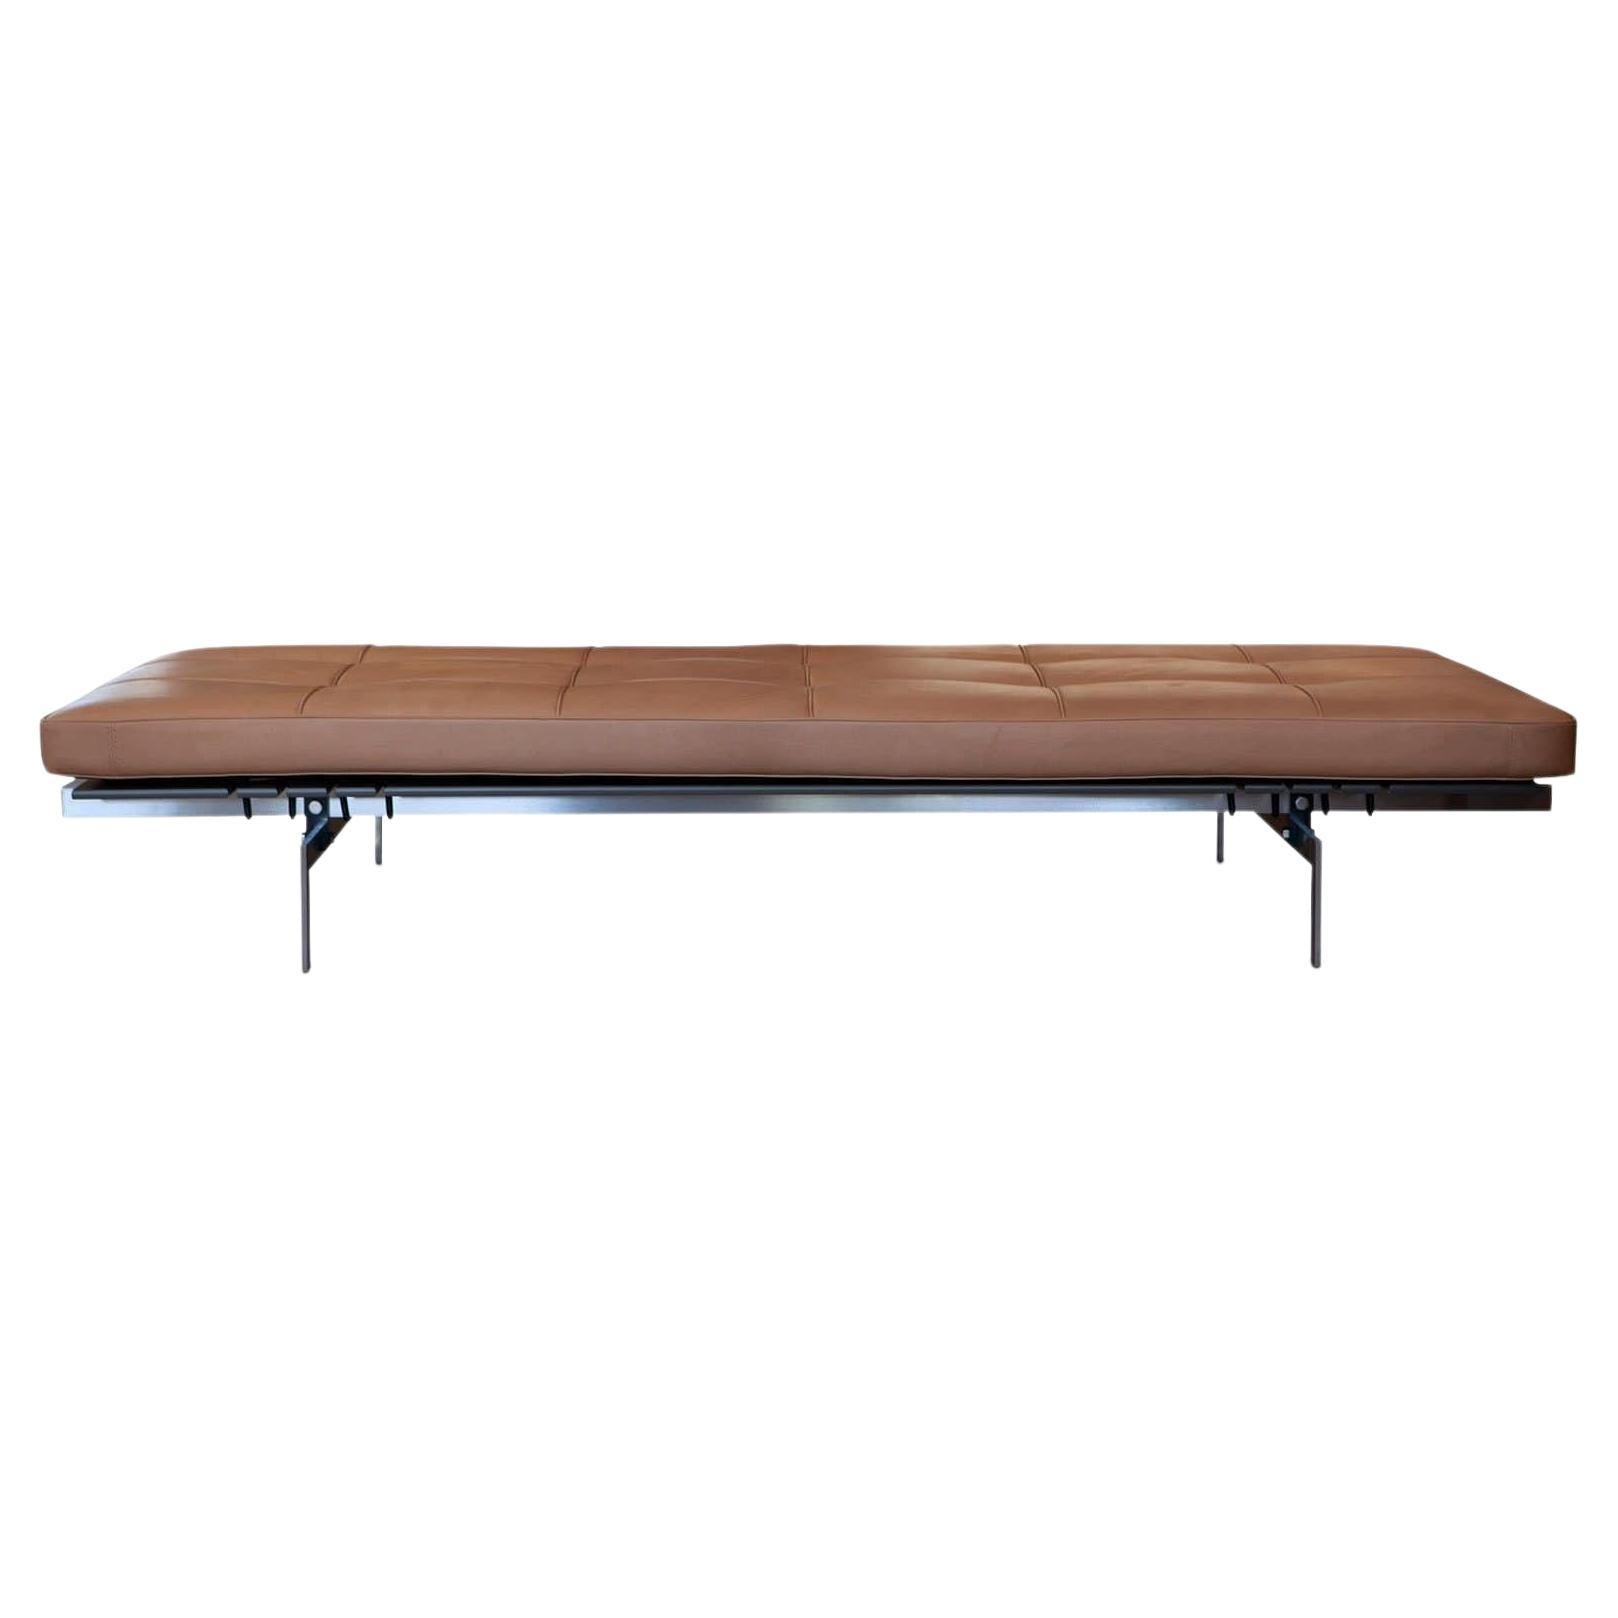 Poul Kjaerholm PK80 Daybed in Rustic Leather by Fritz Hansen For Sale